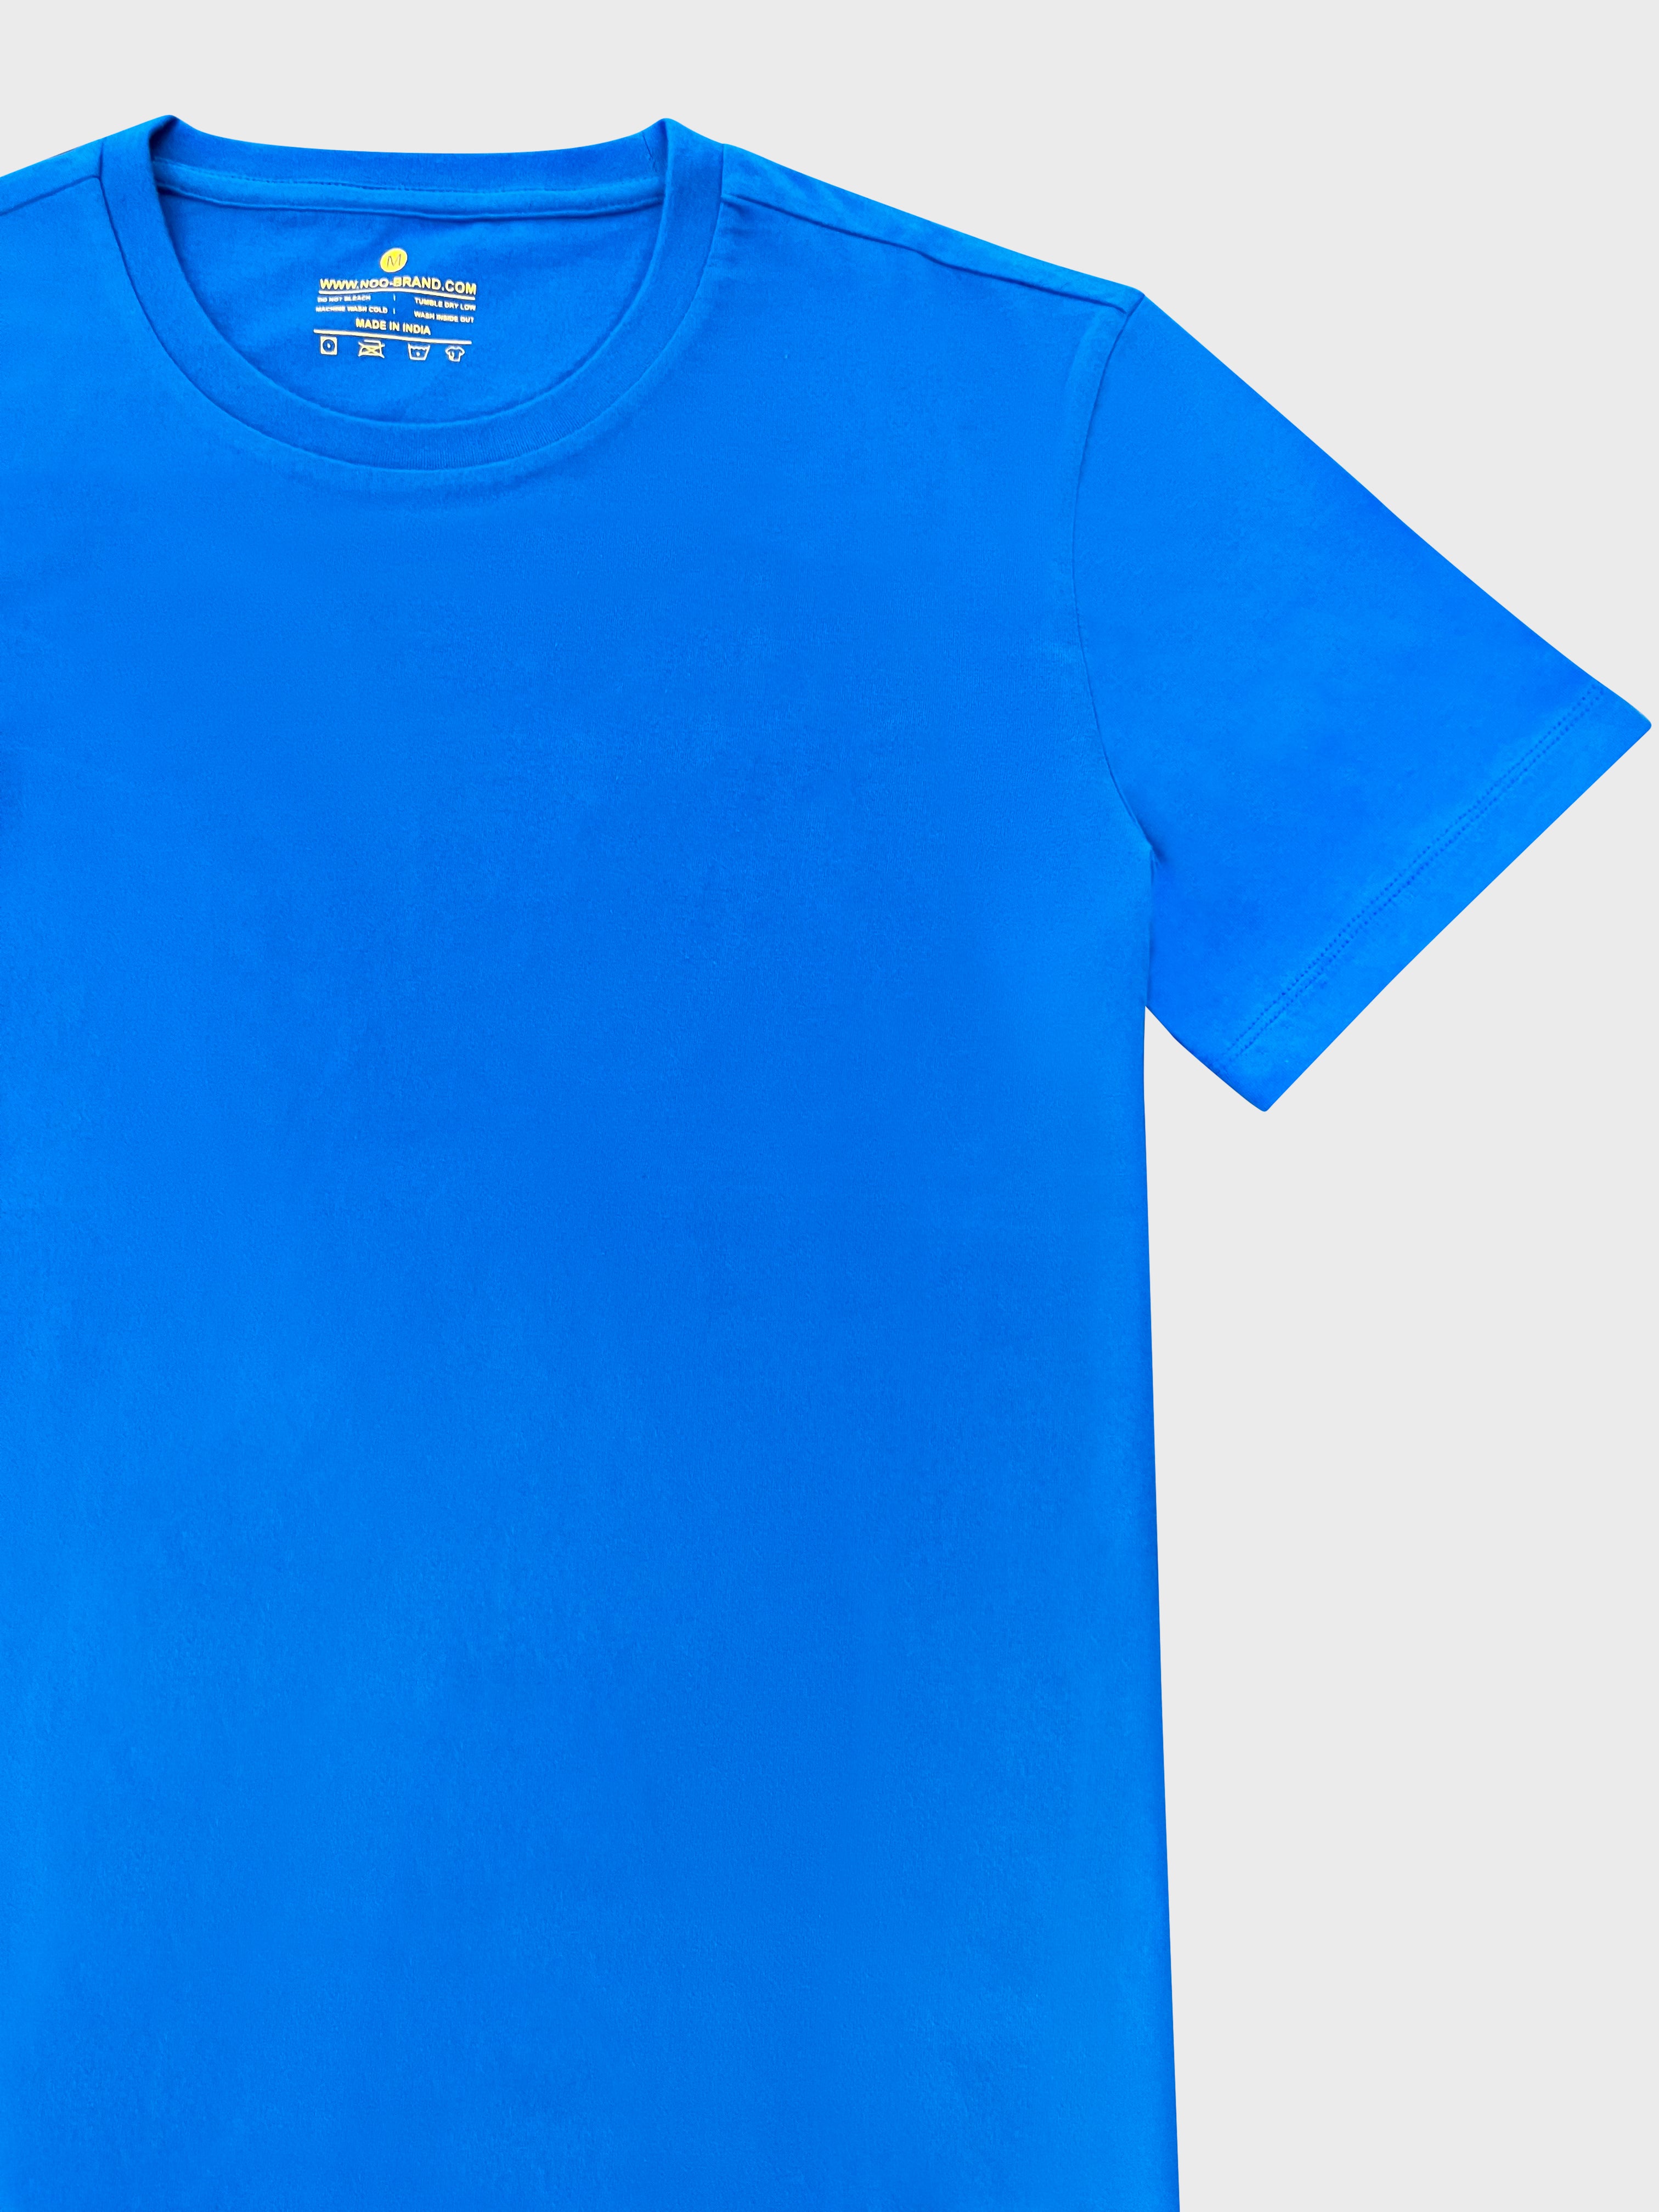 Crew Neck Blue blank T-shirt in Side view